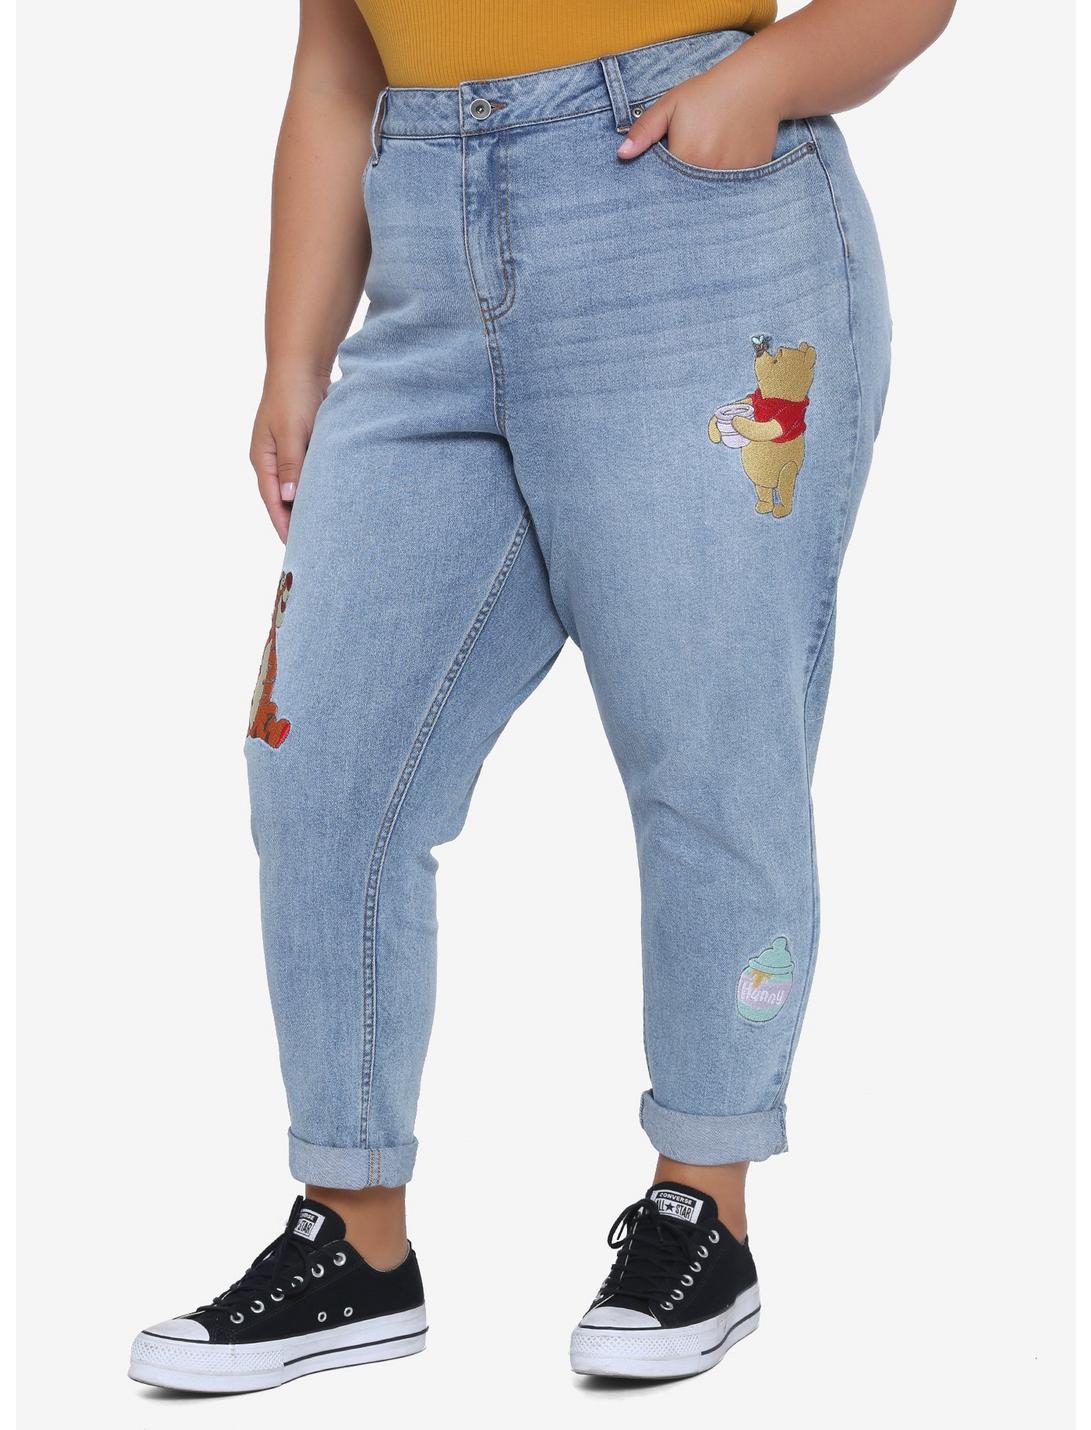 Disney Winnie The Pooh Embroidered Mom Jeans Plus Size, MULTI, hi-res